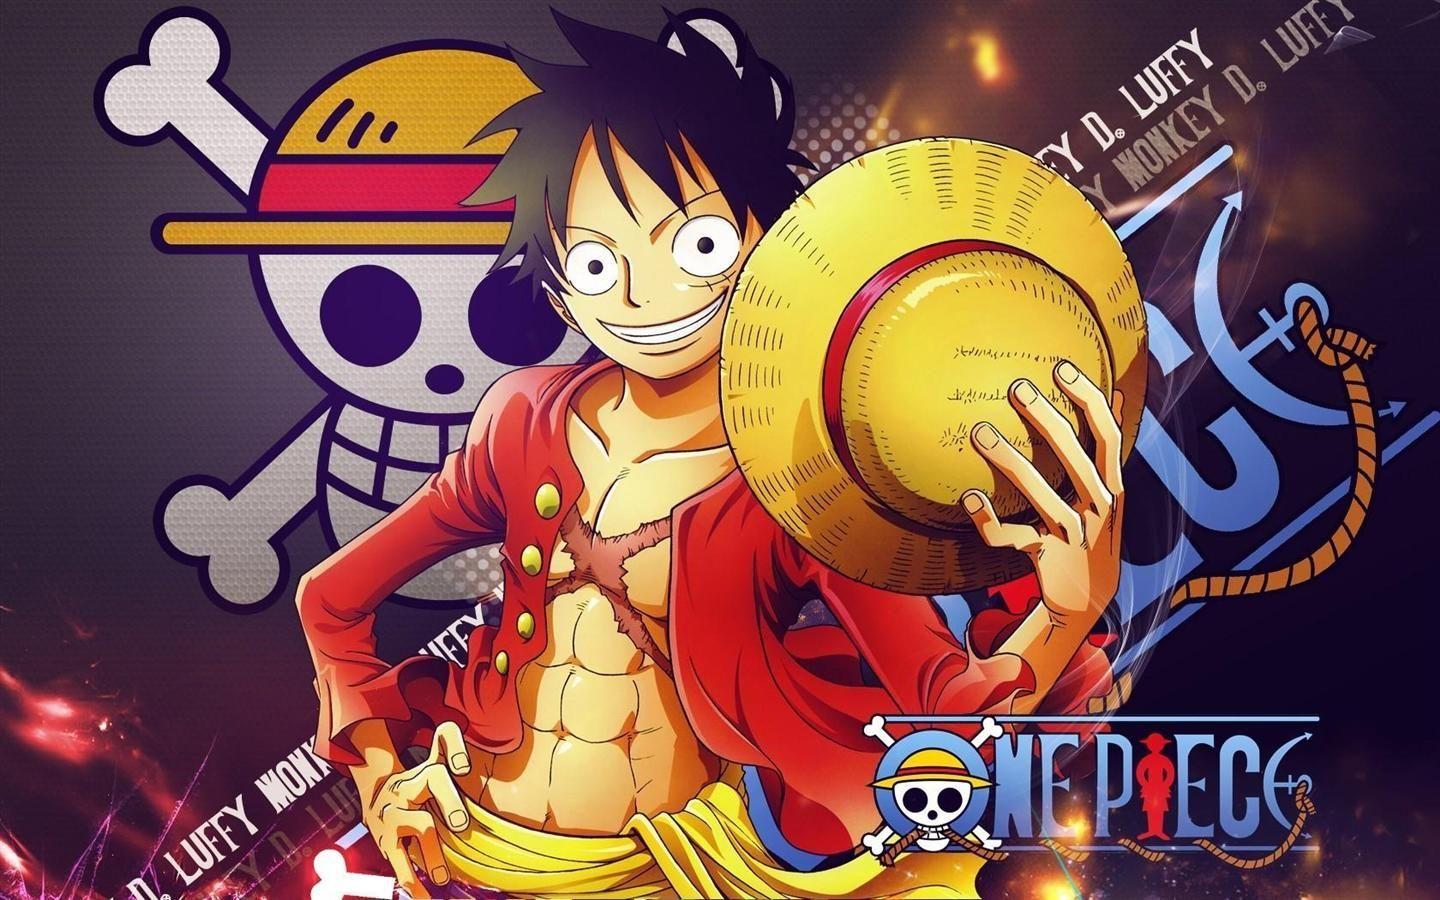 One Piece Monkey D Luffy 2 Years Later New World Wallpaper. one